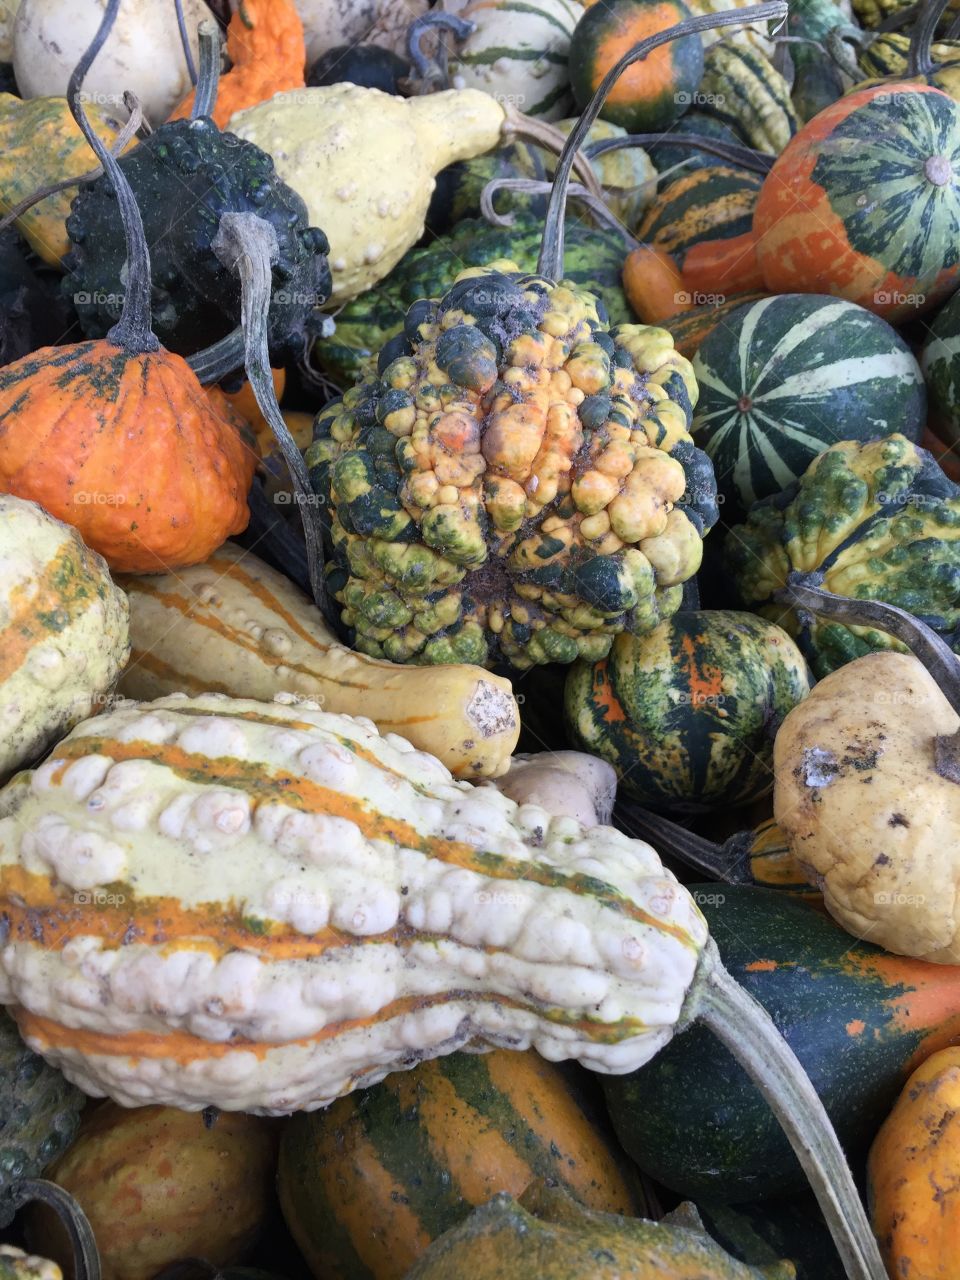 Colorful gourds
